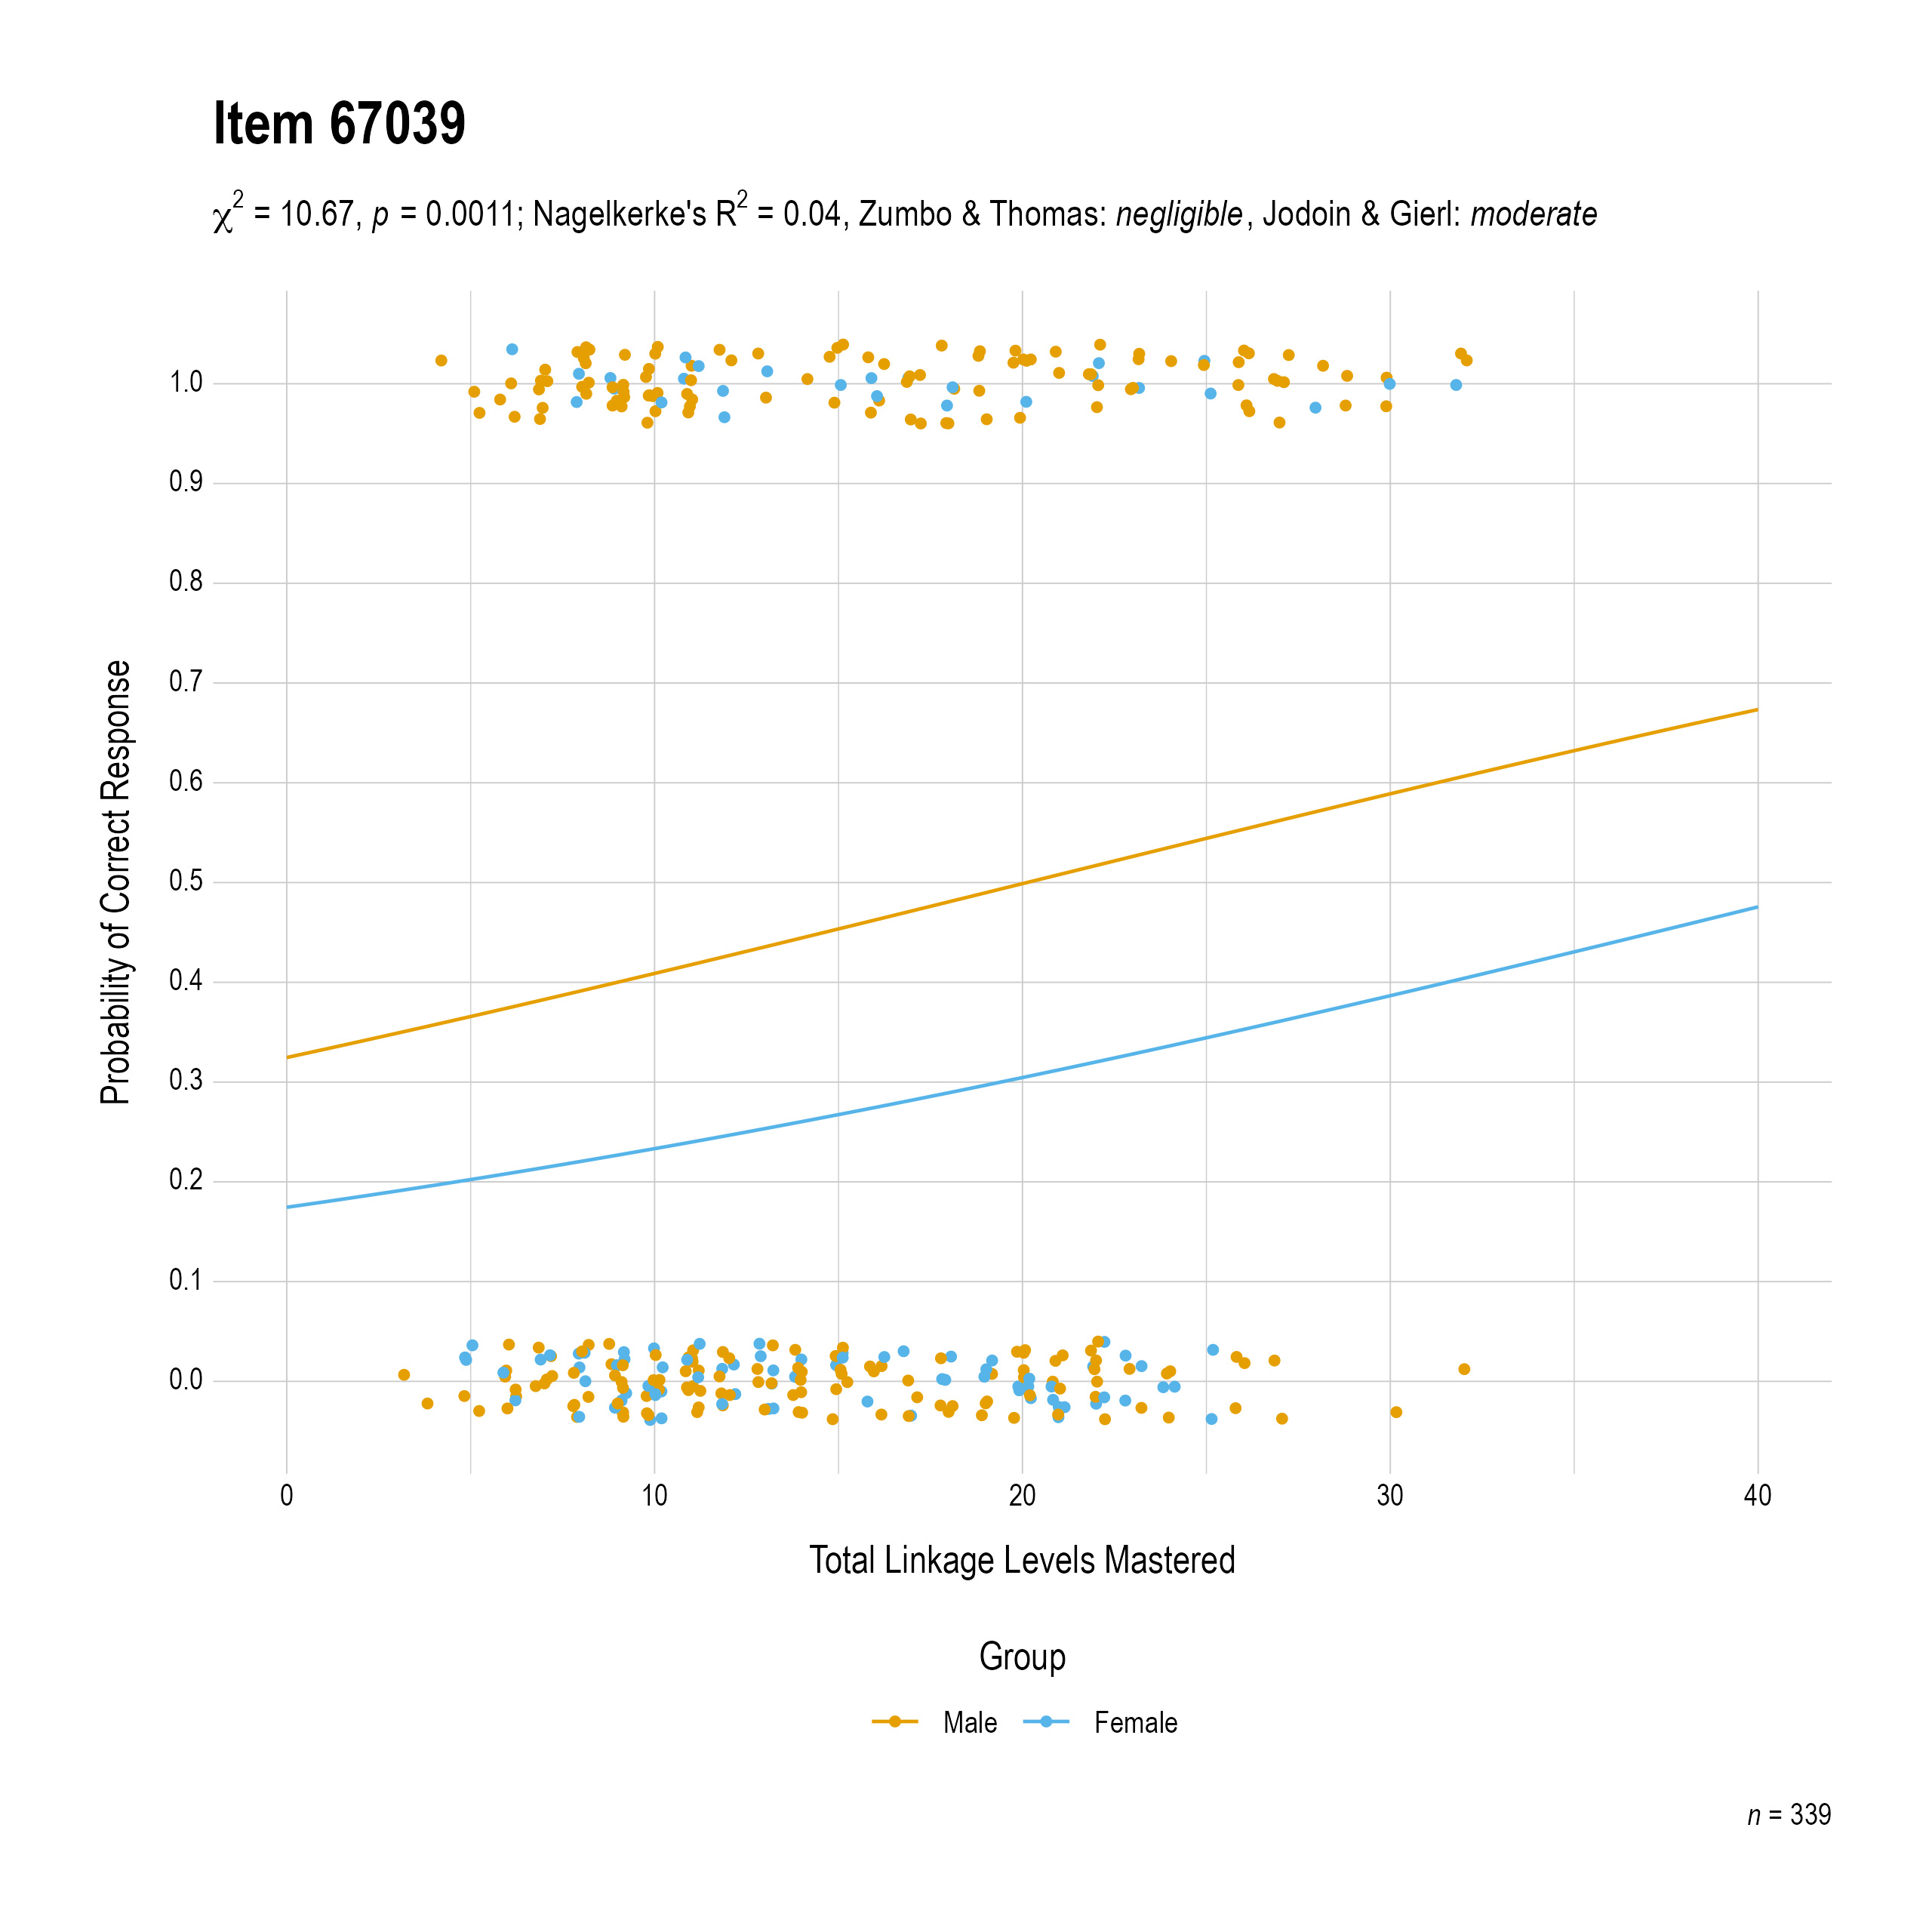 The plot of the uniform gender differential item function evidence for Mathematics item 67039. The figure contains points shaded by group. The figure also contains a logistic regression curve for each group. The total linkage levels mastered in is on the x-axis, and the probability of a correct response is on the y-axis.